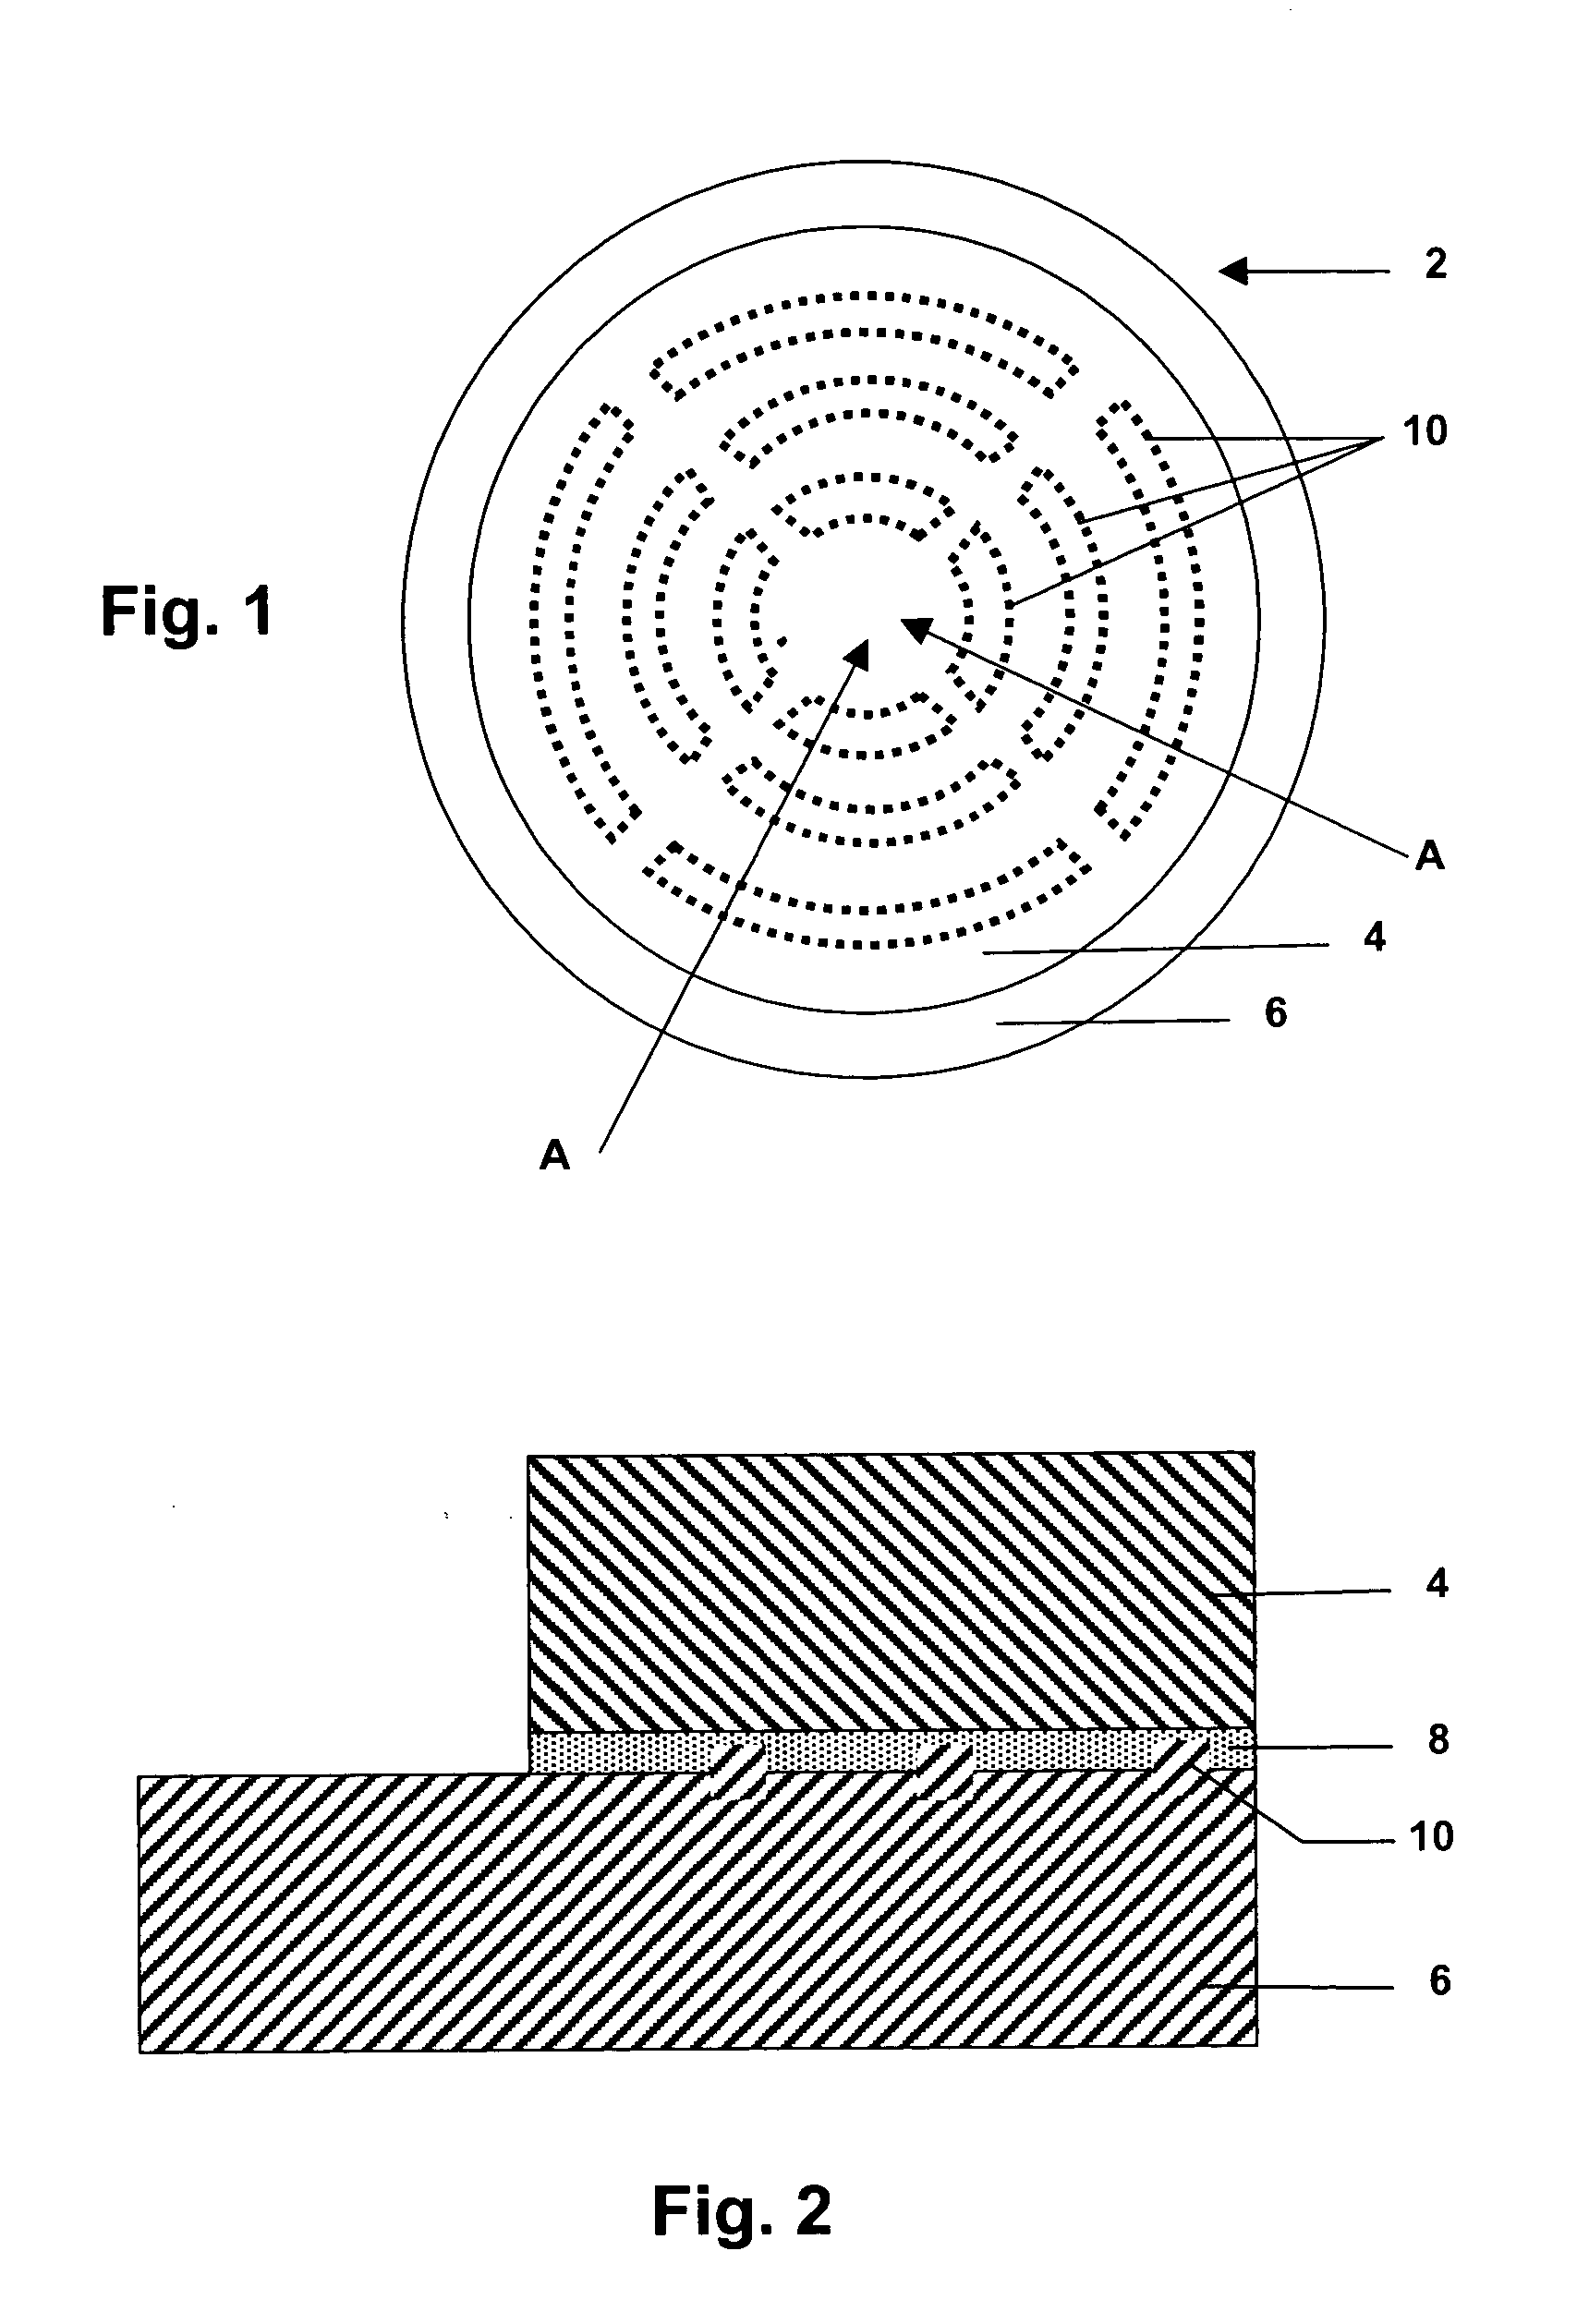 Method for bonding a sputter target to a backing plate and the assembly thereof